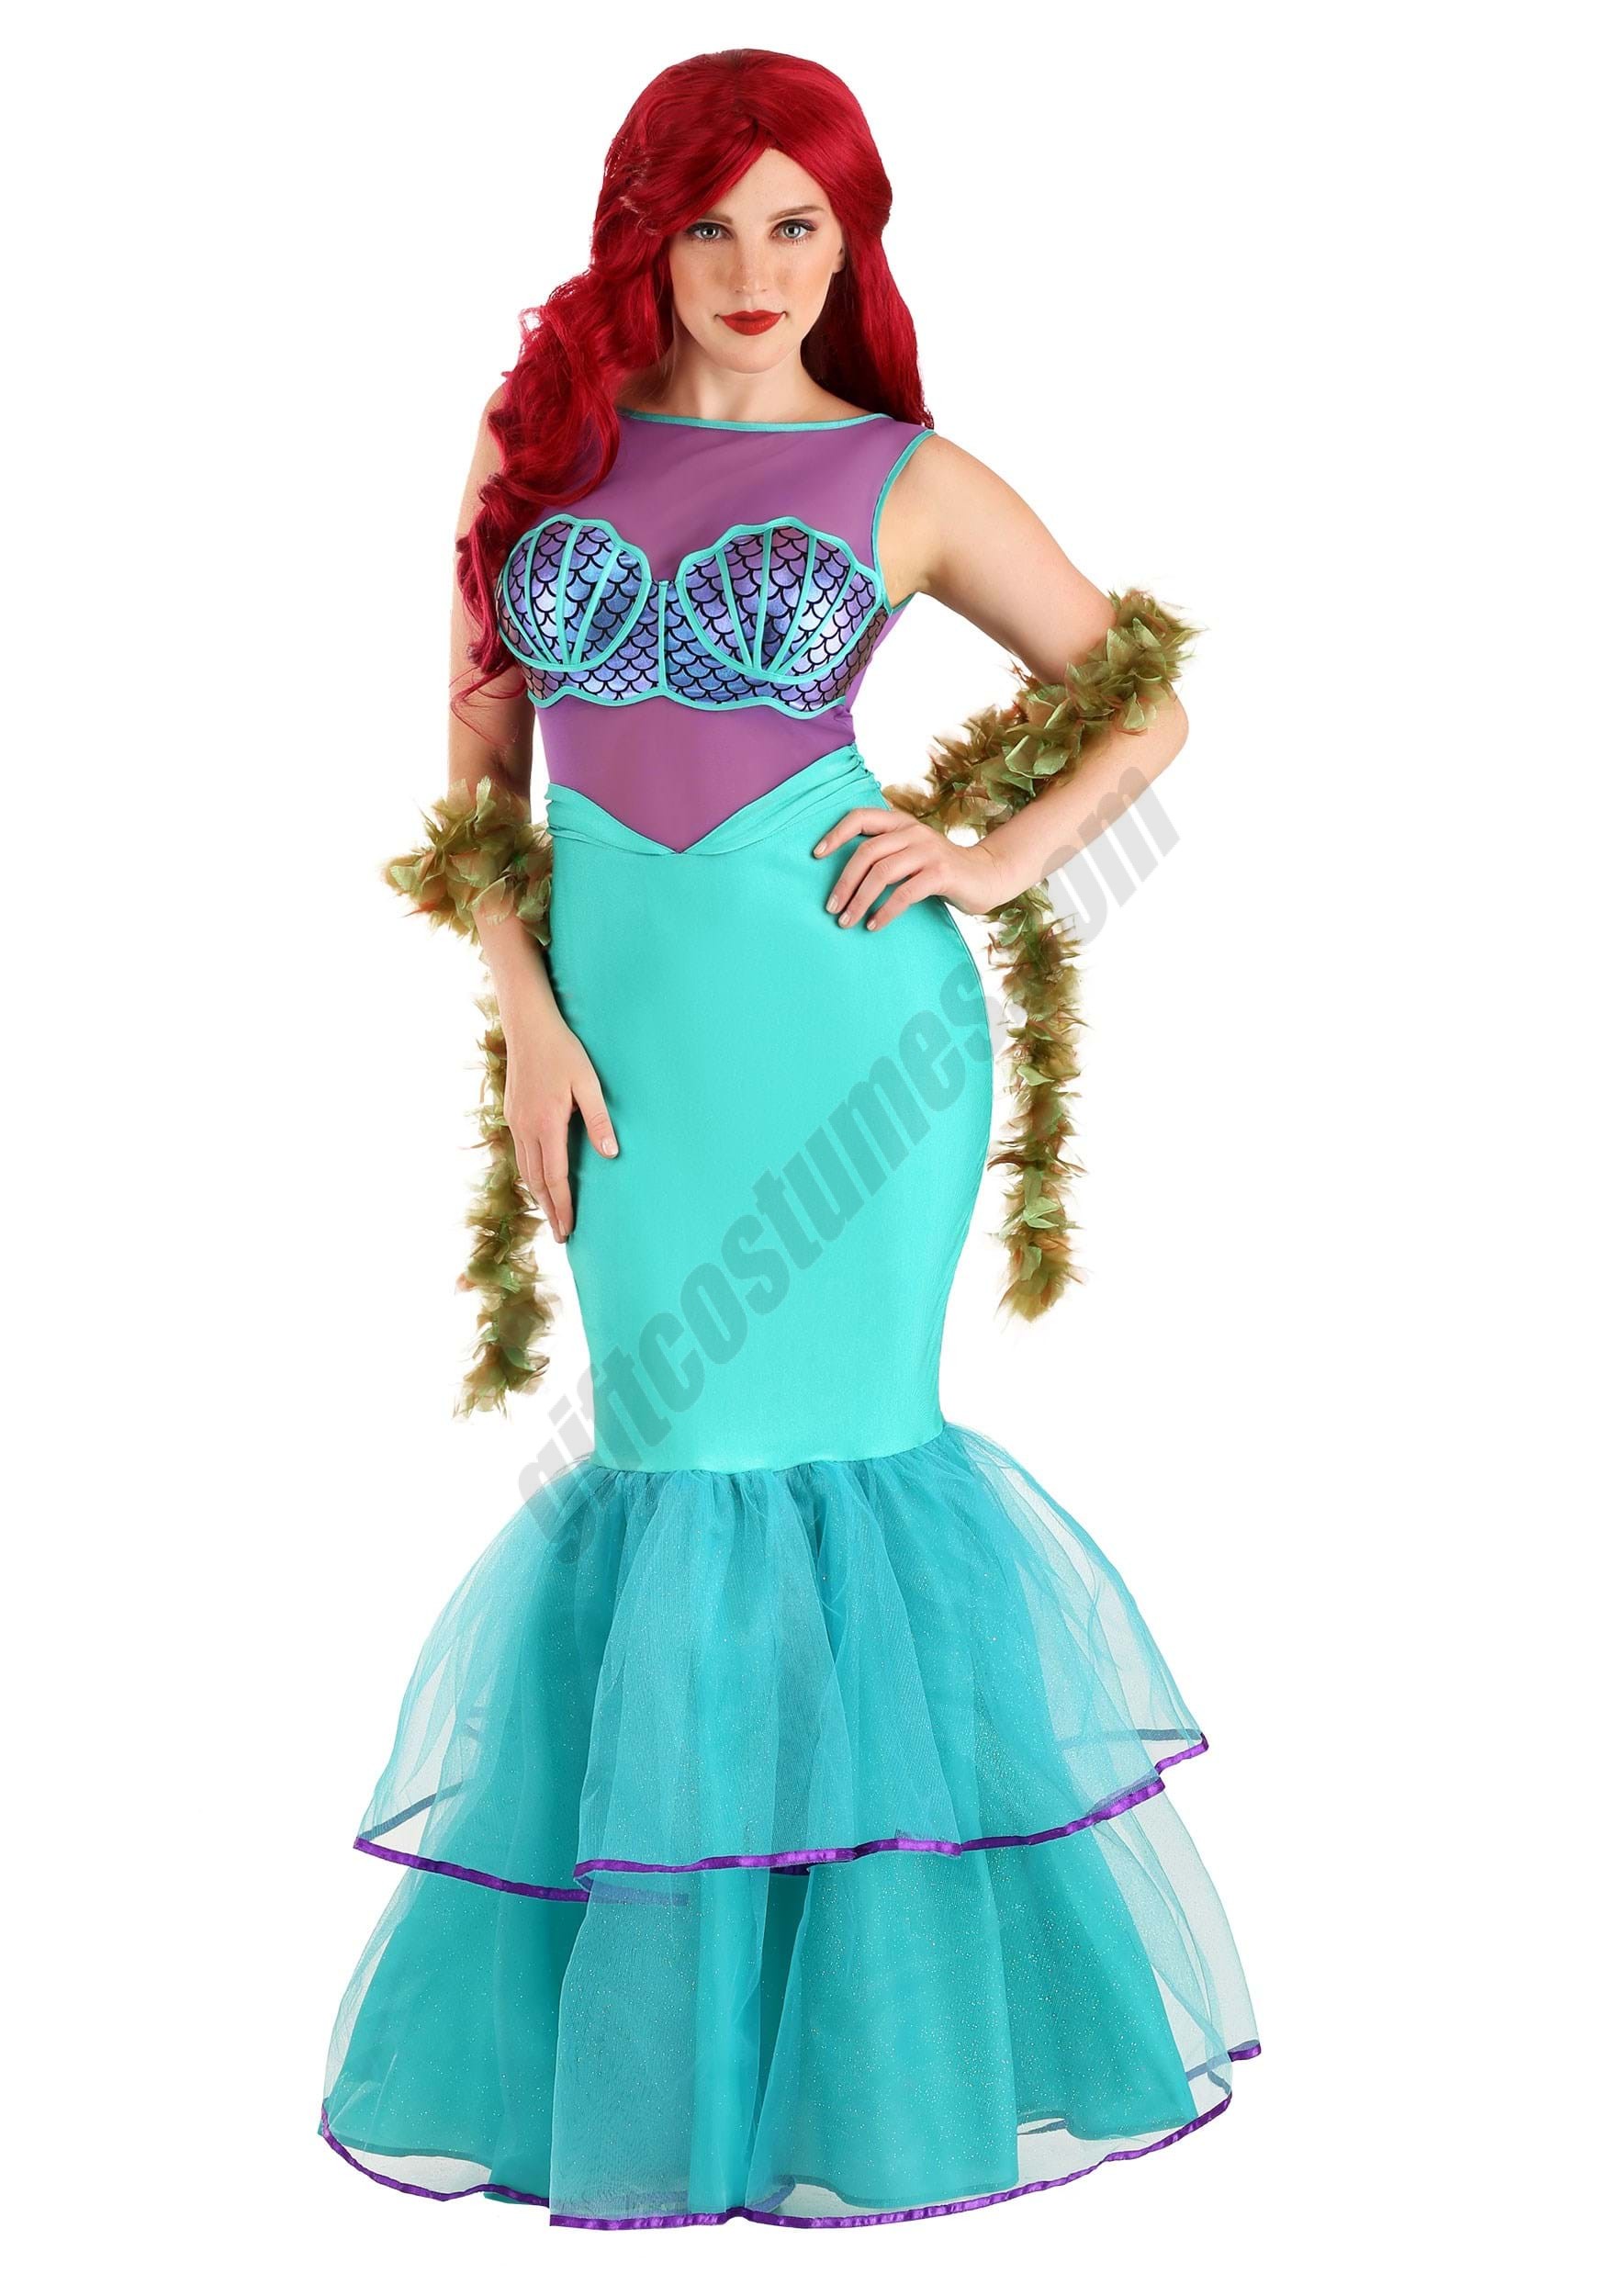 Shell-a-brate Mermaid Women's Costume - Shell-a-brate Mermaid Women's Costume